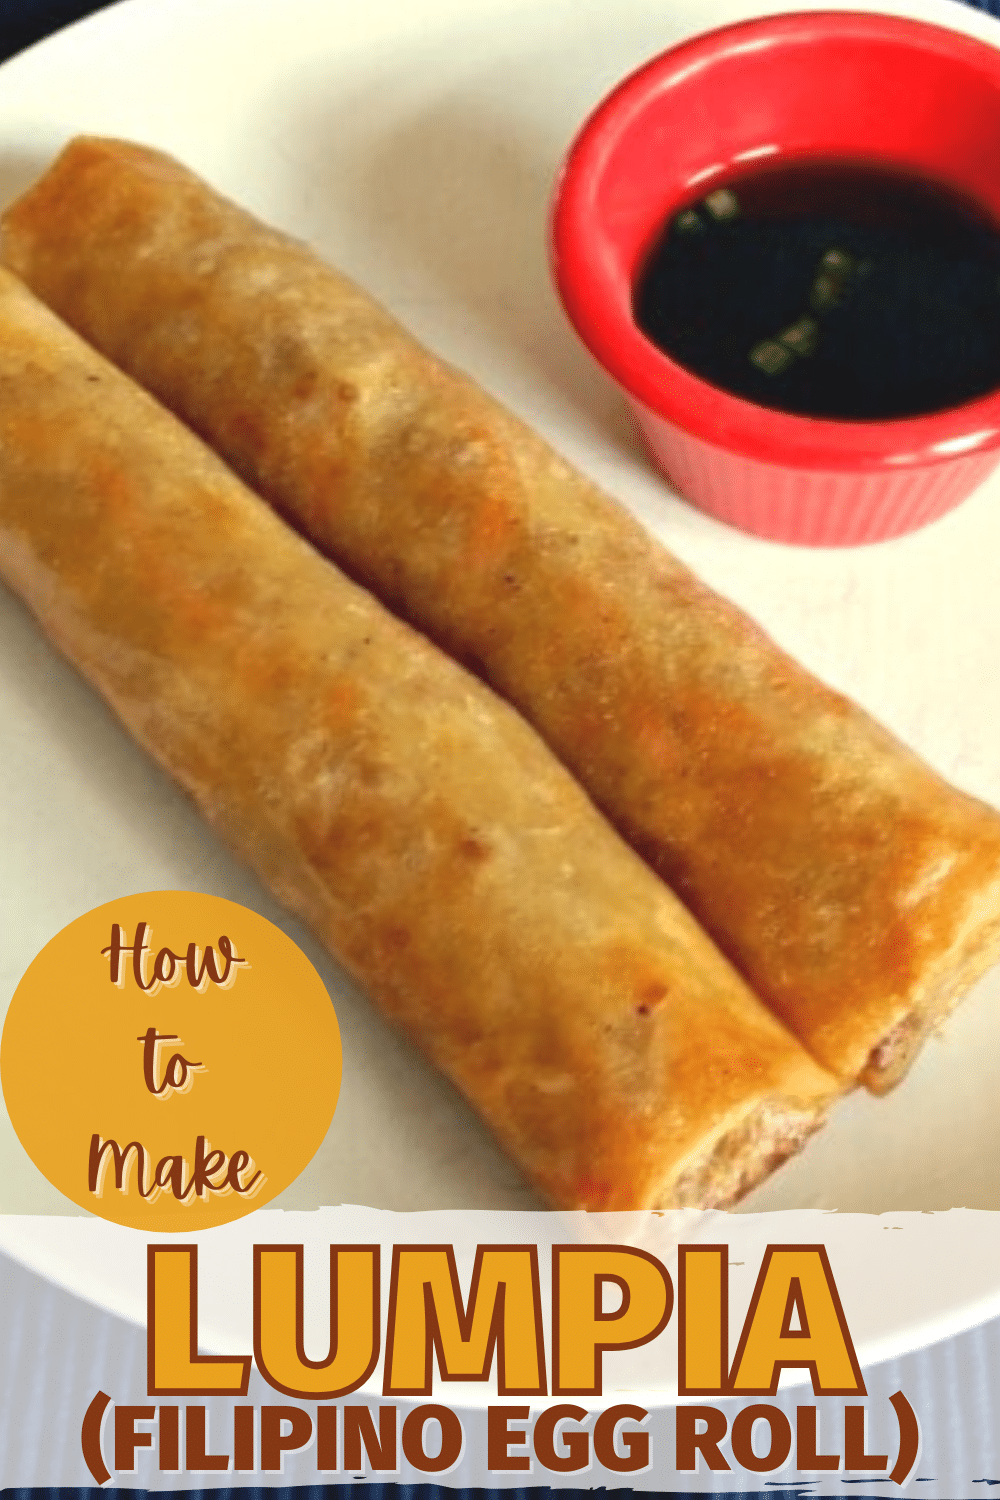 Do you want to learn how to make lumpia? Here's an easy-to-follow recipe for lumpia (Filipino egg rolls), the delicious appetizer that everyone loves. #lumpia #filipinofood #recipe #appetizer via @wondermomwannab